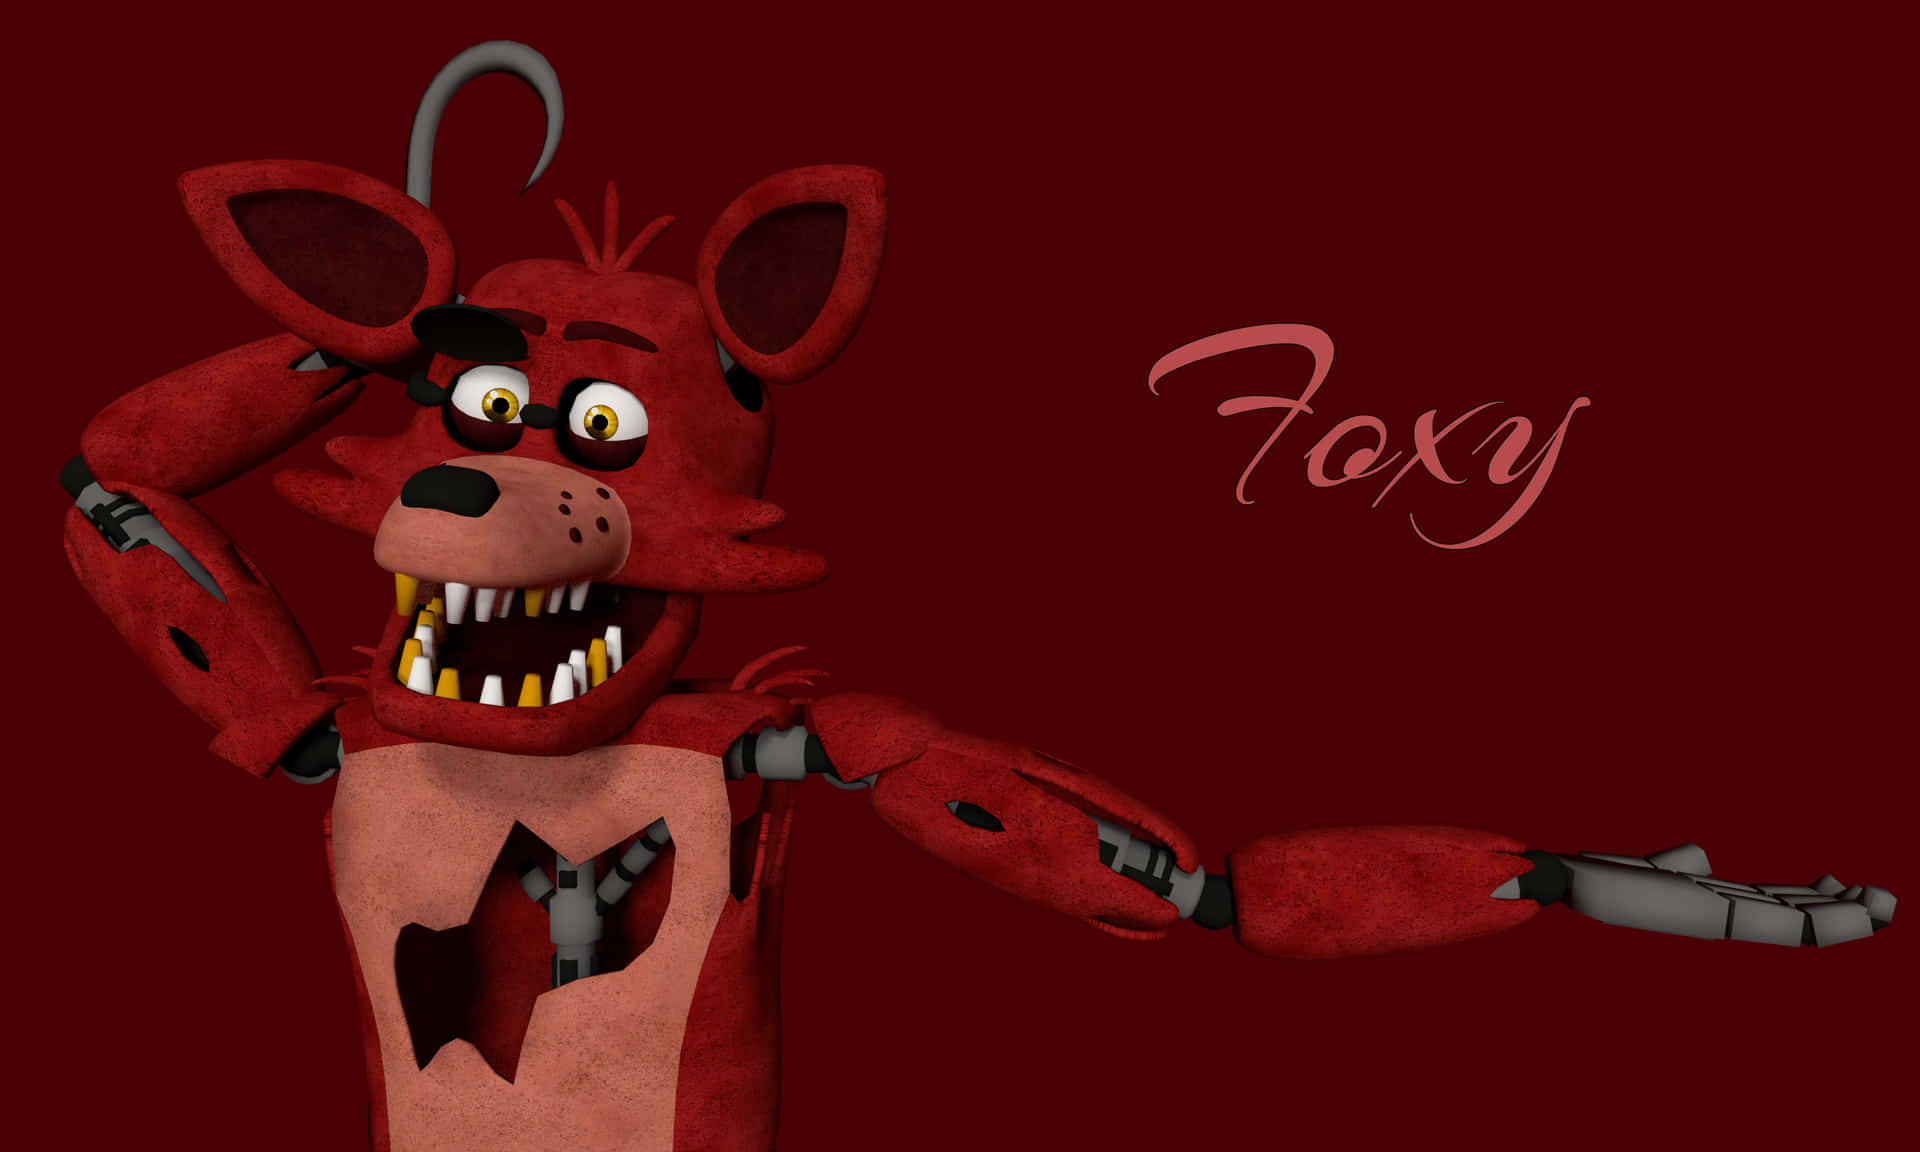 "Look at this adorable foxy!" Wallpaper